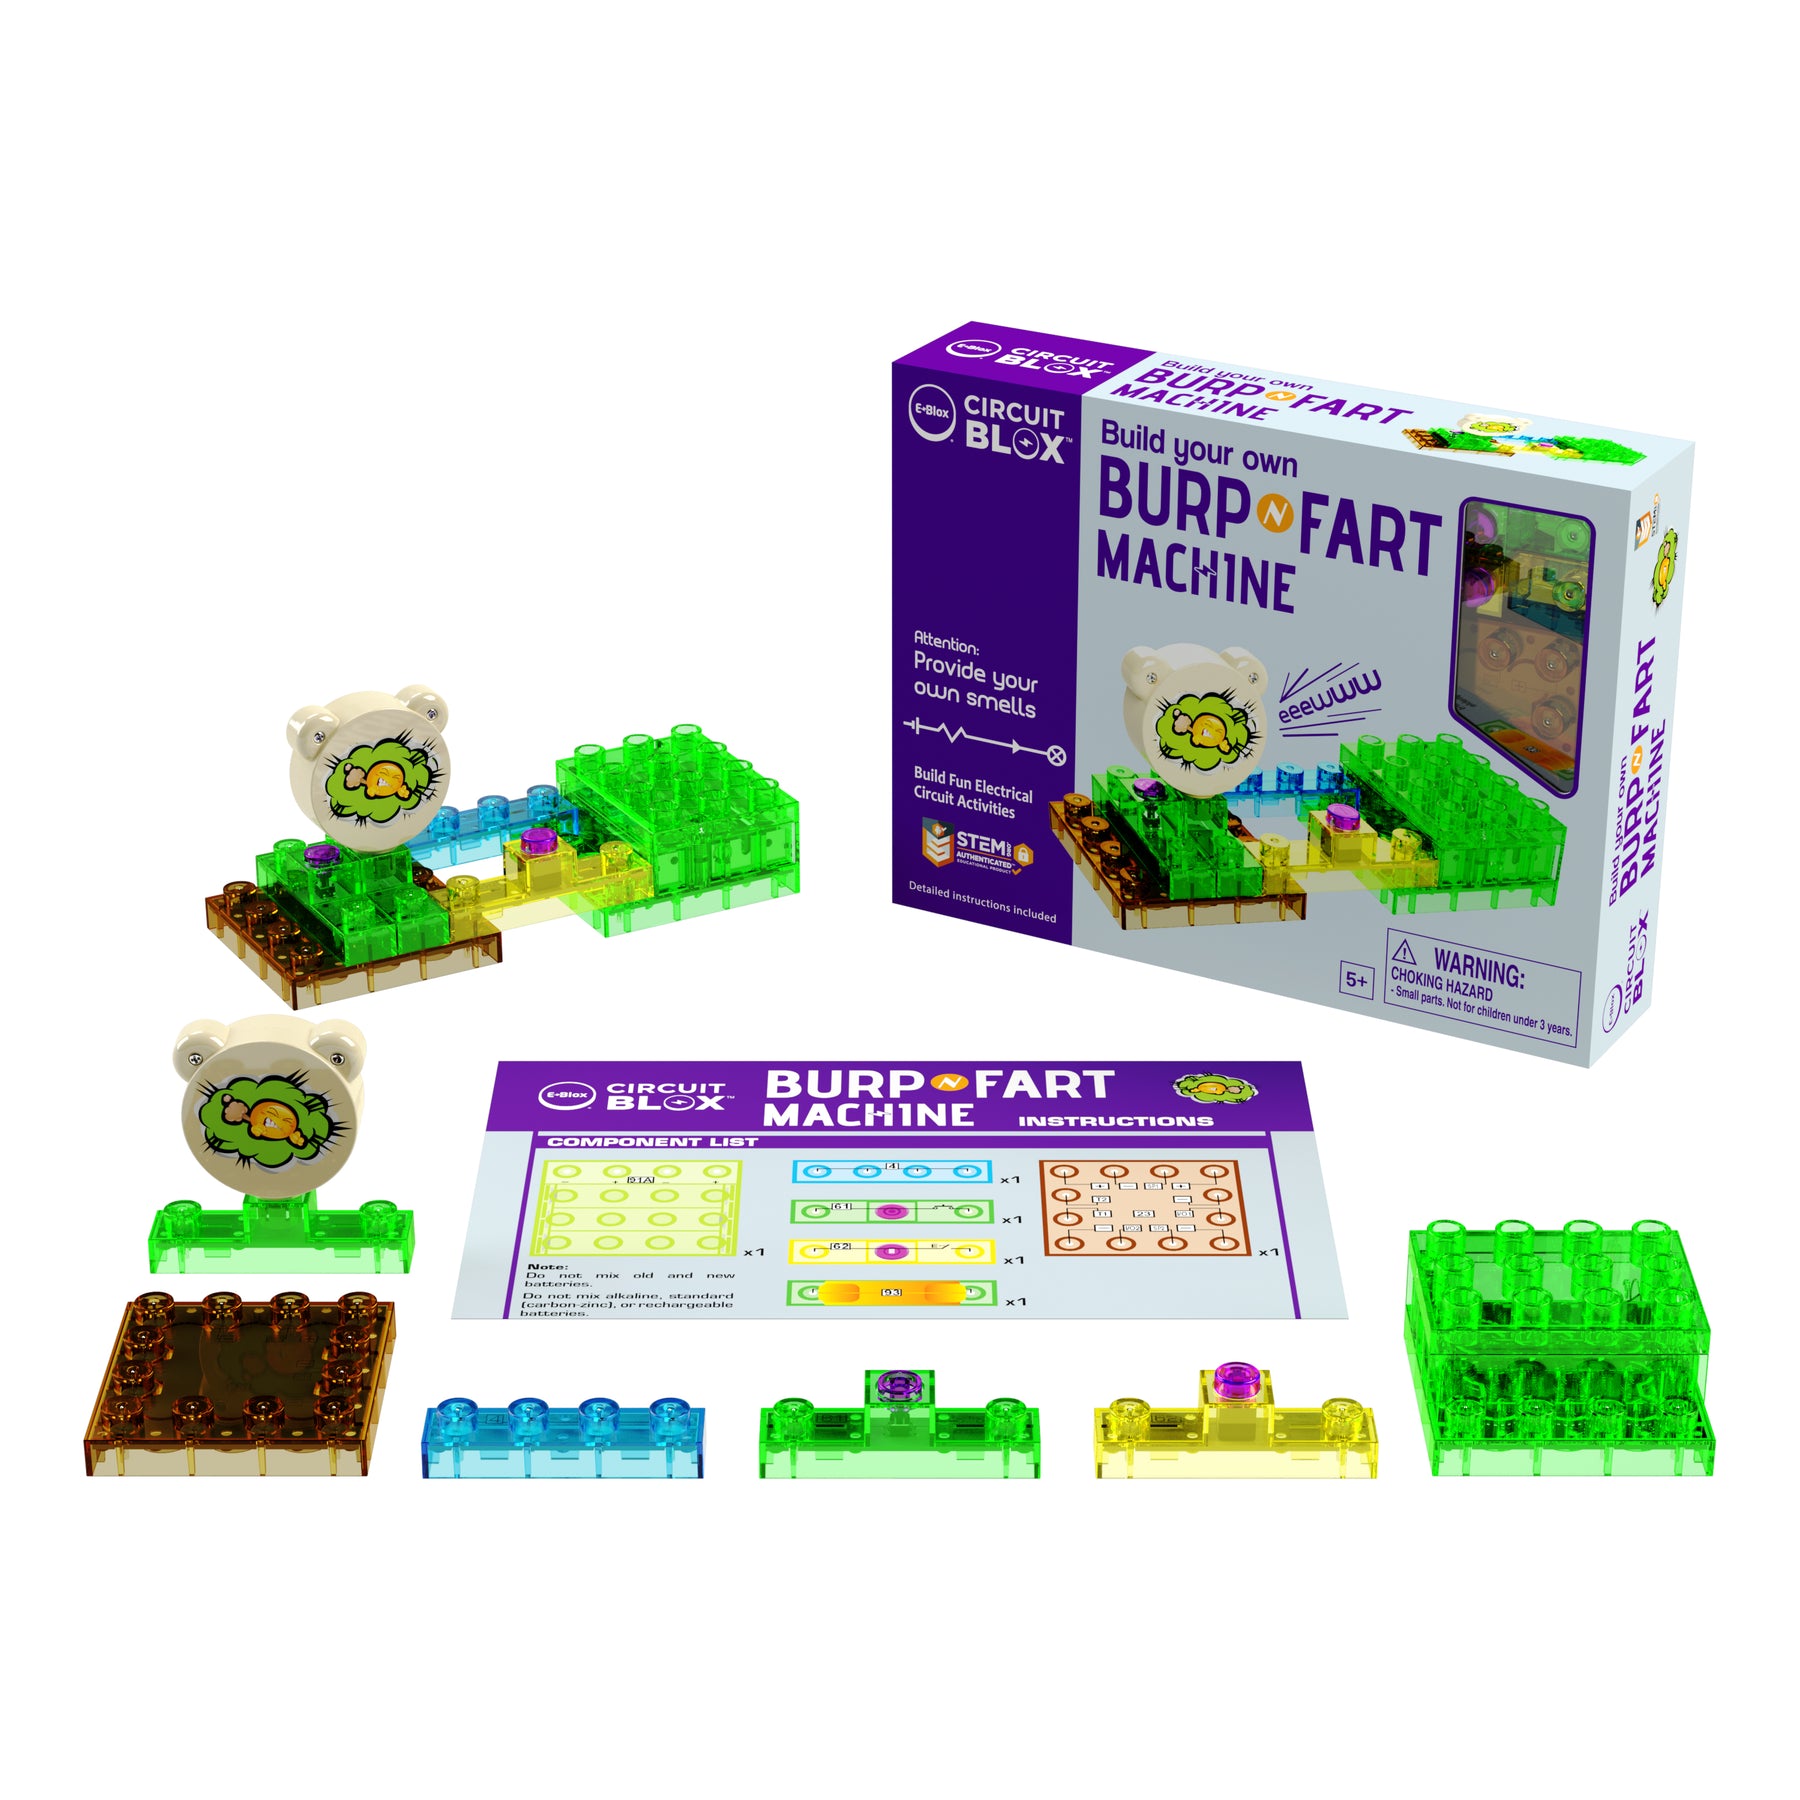 Circuit Blox Build Your Own Burp and Fart Machine